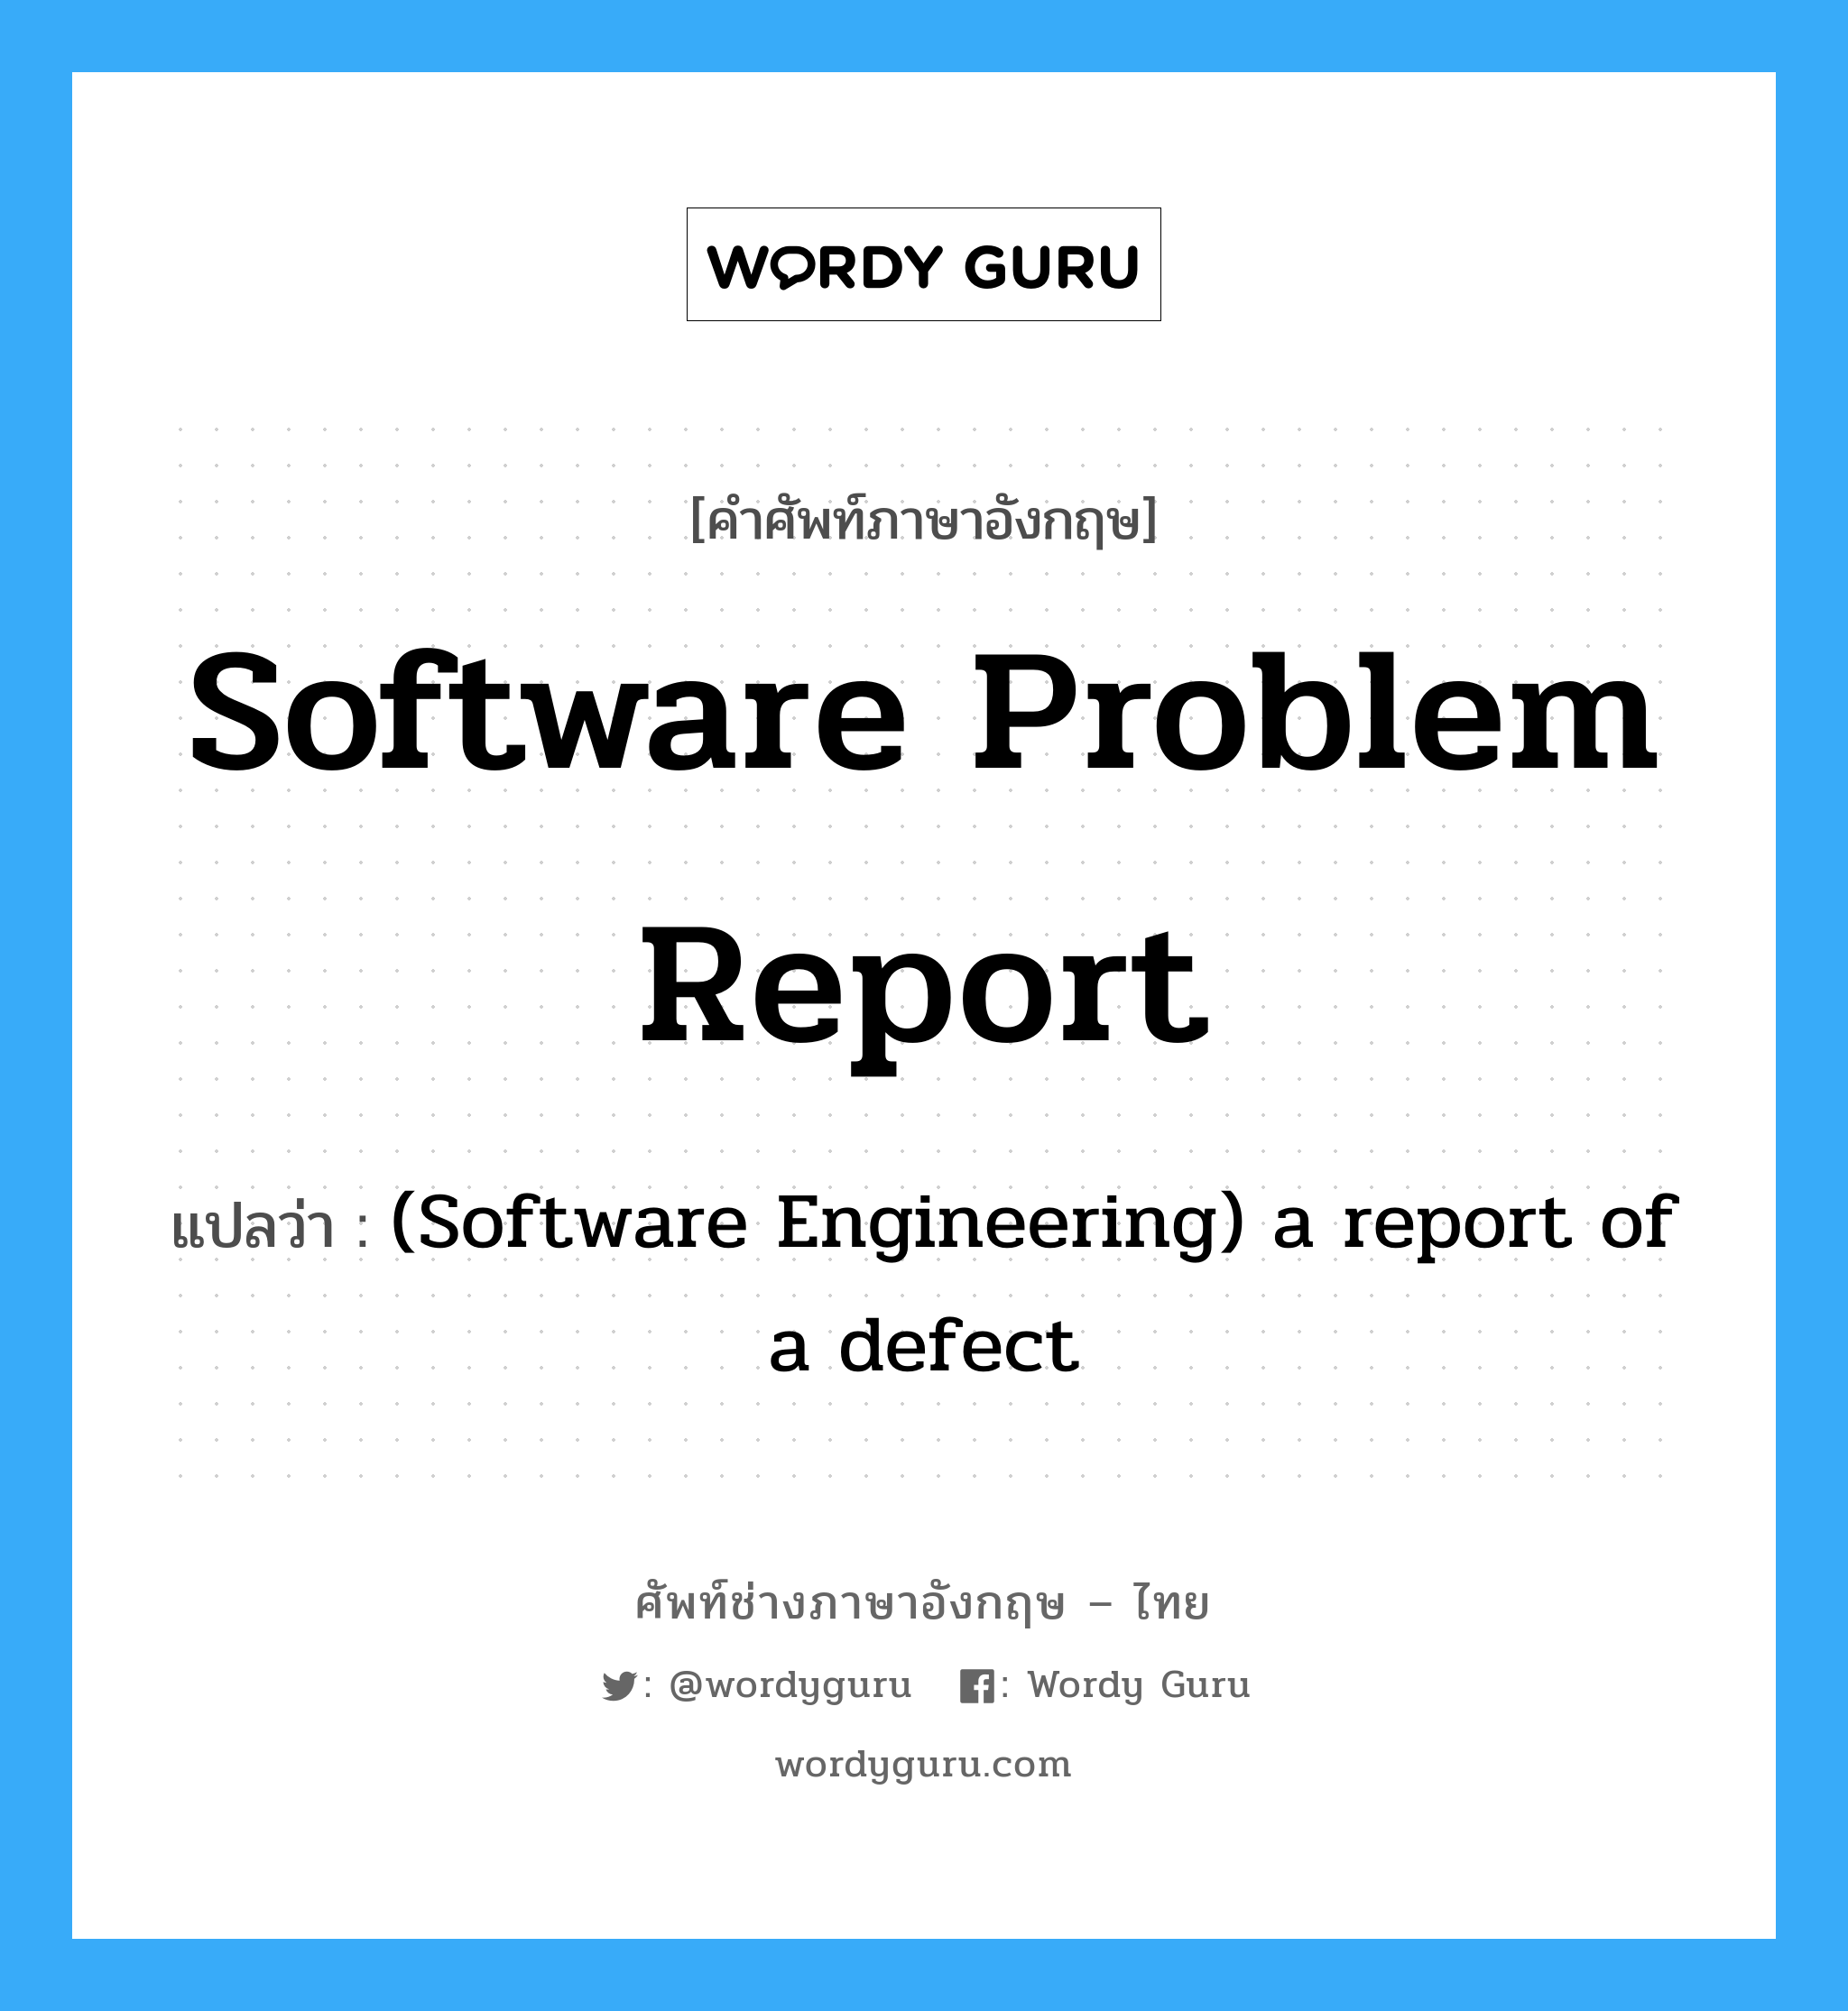 (Software Engineering) a report of a defect ภาษาอังกฤษ?, คำศัพท์ช่างภาษาอังกฤษ - ไทย (Software Engineering) a report of a defect คำศัพท์ภาษาอังกฤษ (Software Engineering) a report of a defect แปลว่า Software problem report